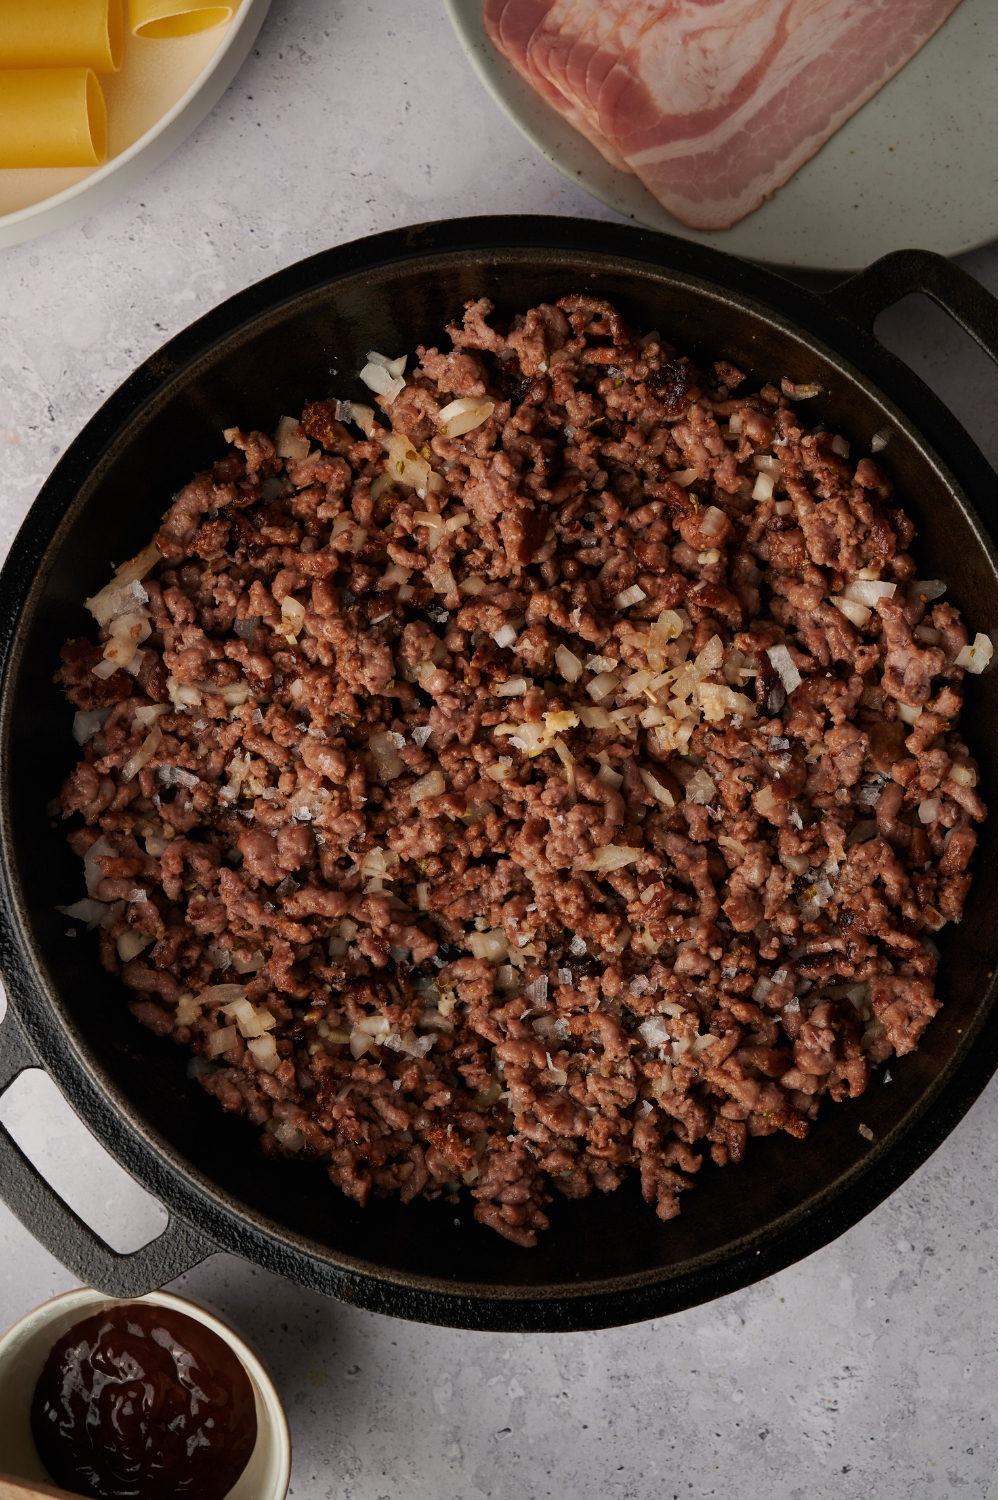 A skillet with ground beef cooking with garlic, onions, and seasonings mixed in.